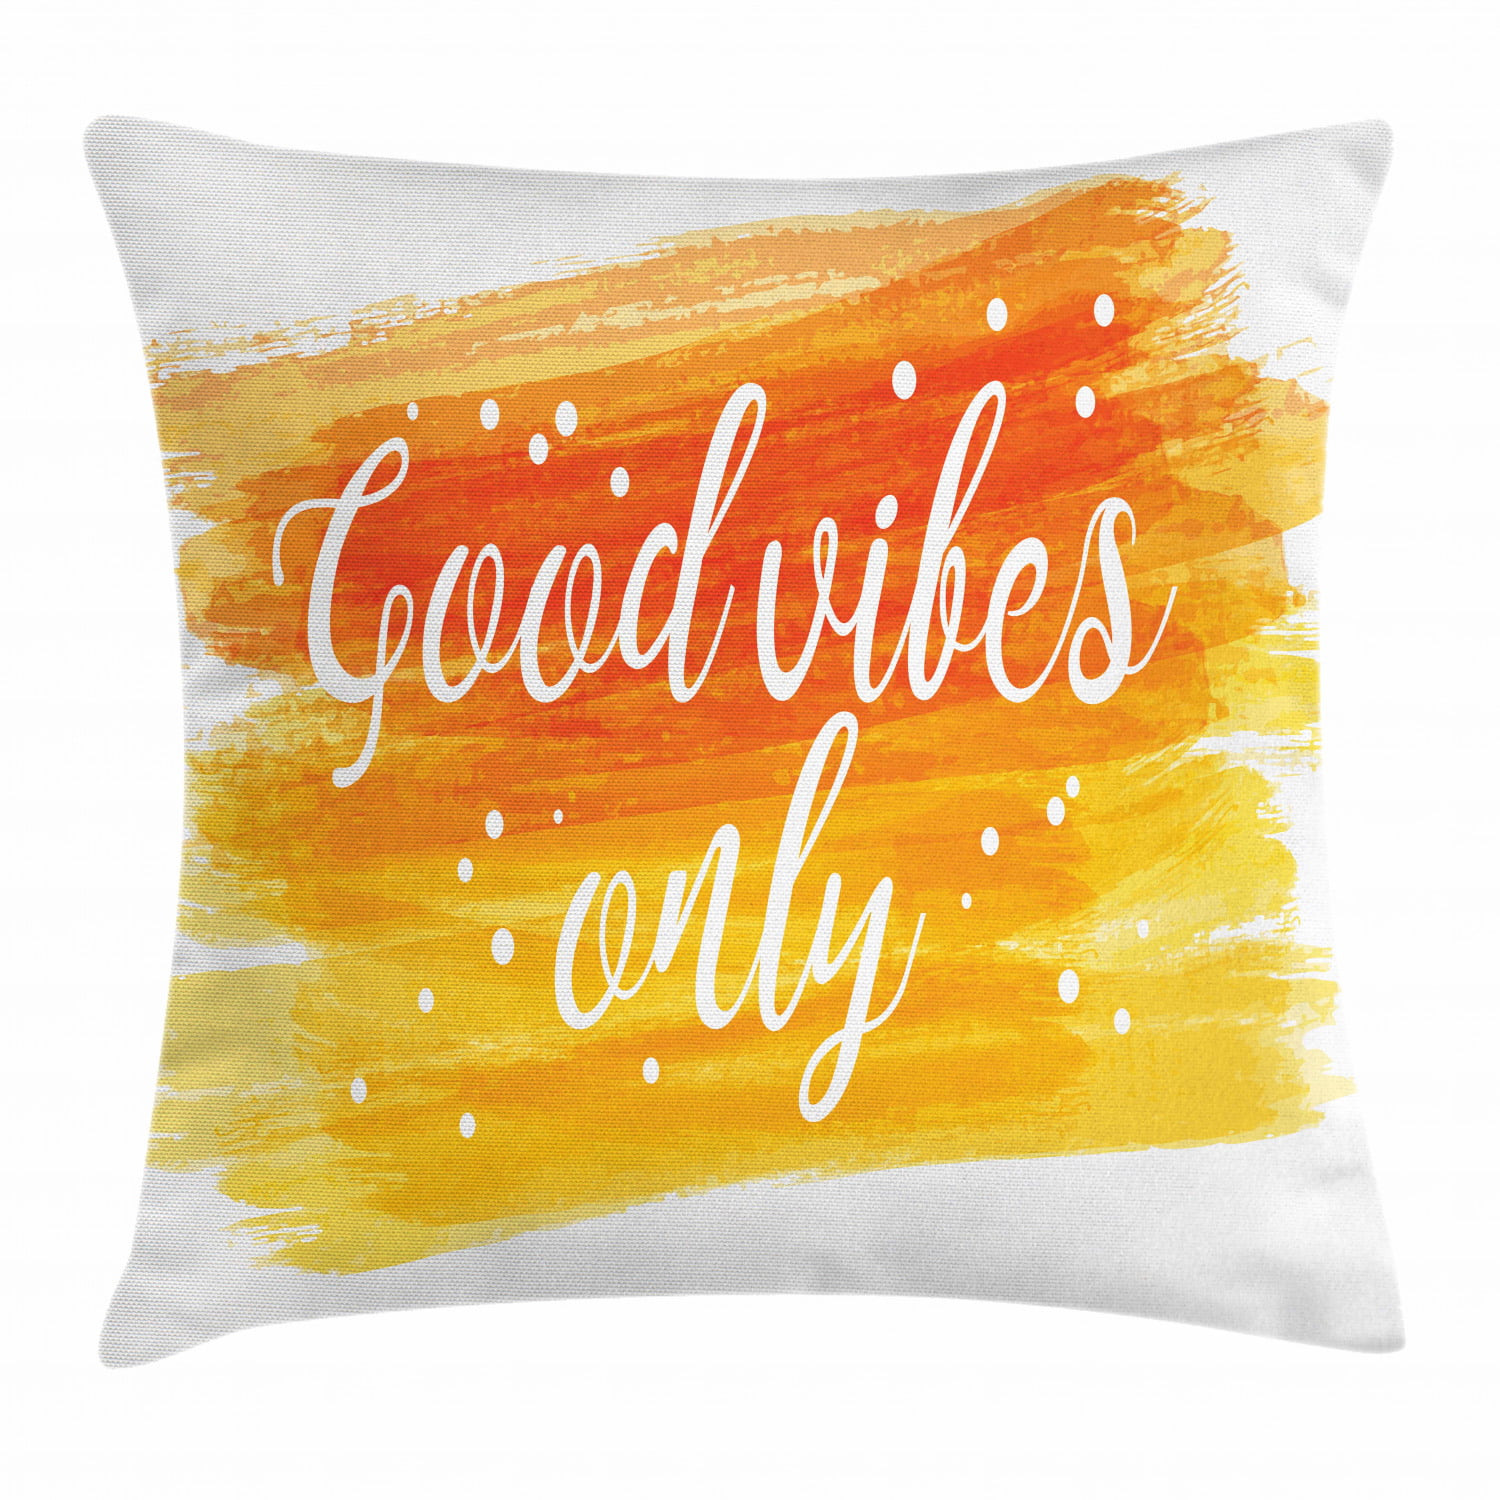 Throw Pillow Cover Polyester 18 X 18 Inches White Party Label with Camera and Collect Moments Not Things Say Cheese Lettering Black Decorative Cushion Pillow Case Square Two Sides Print for Home